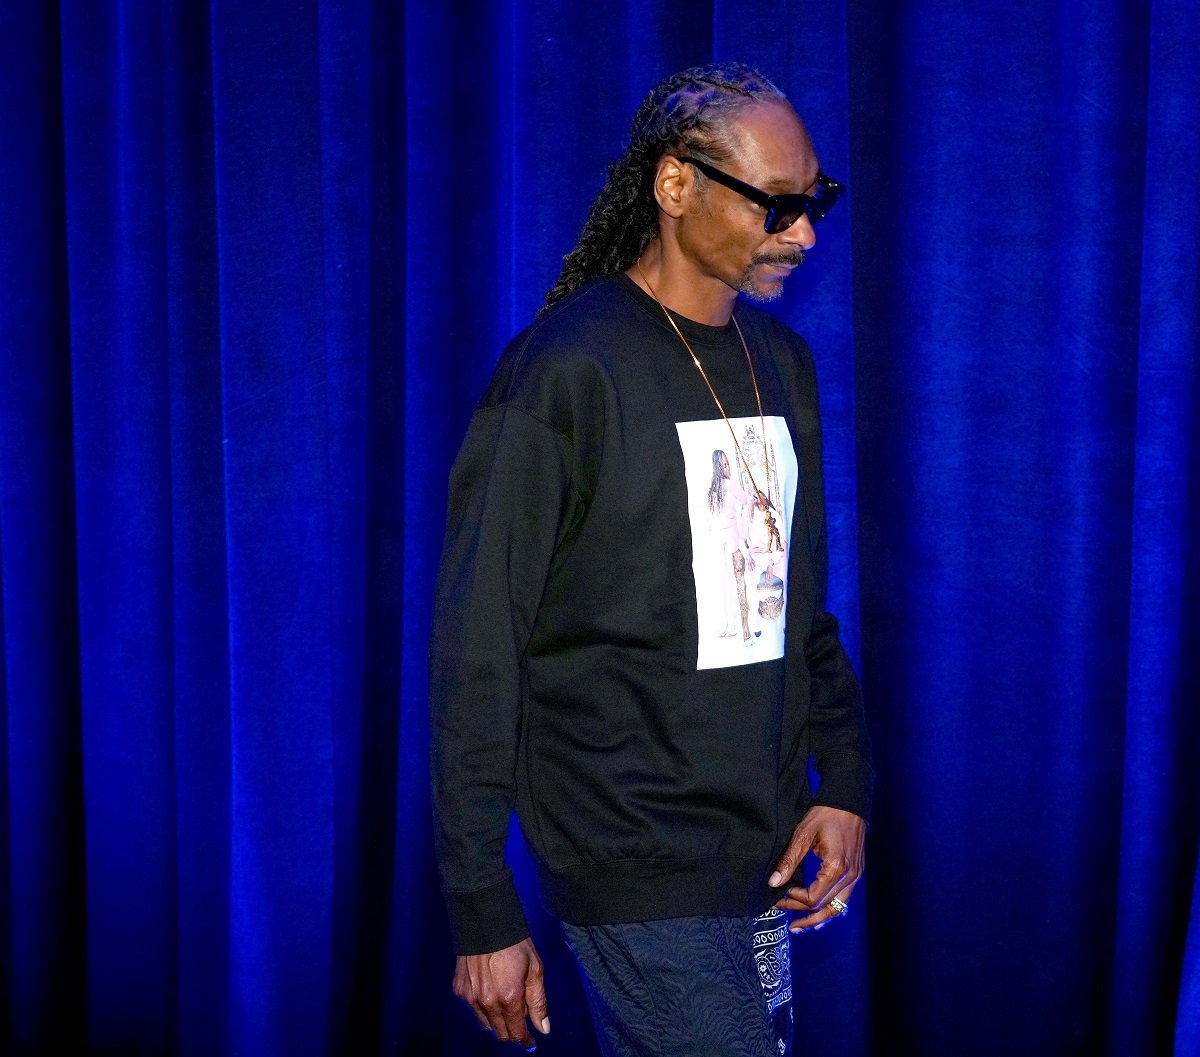 How Tall Is Snoop Dogg?